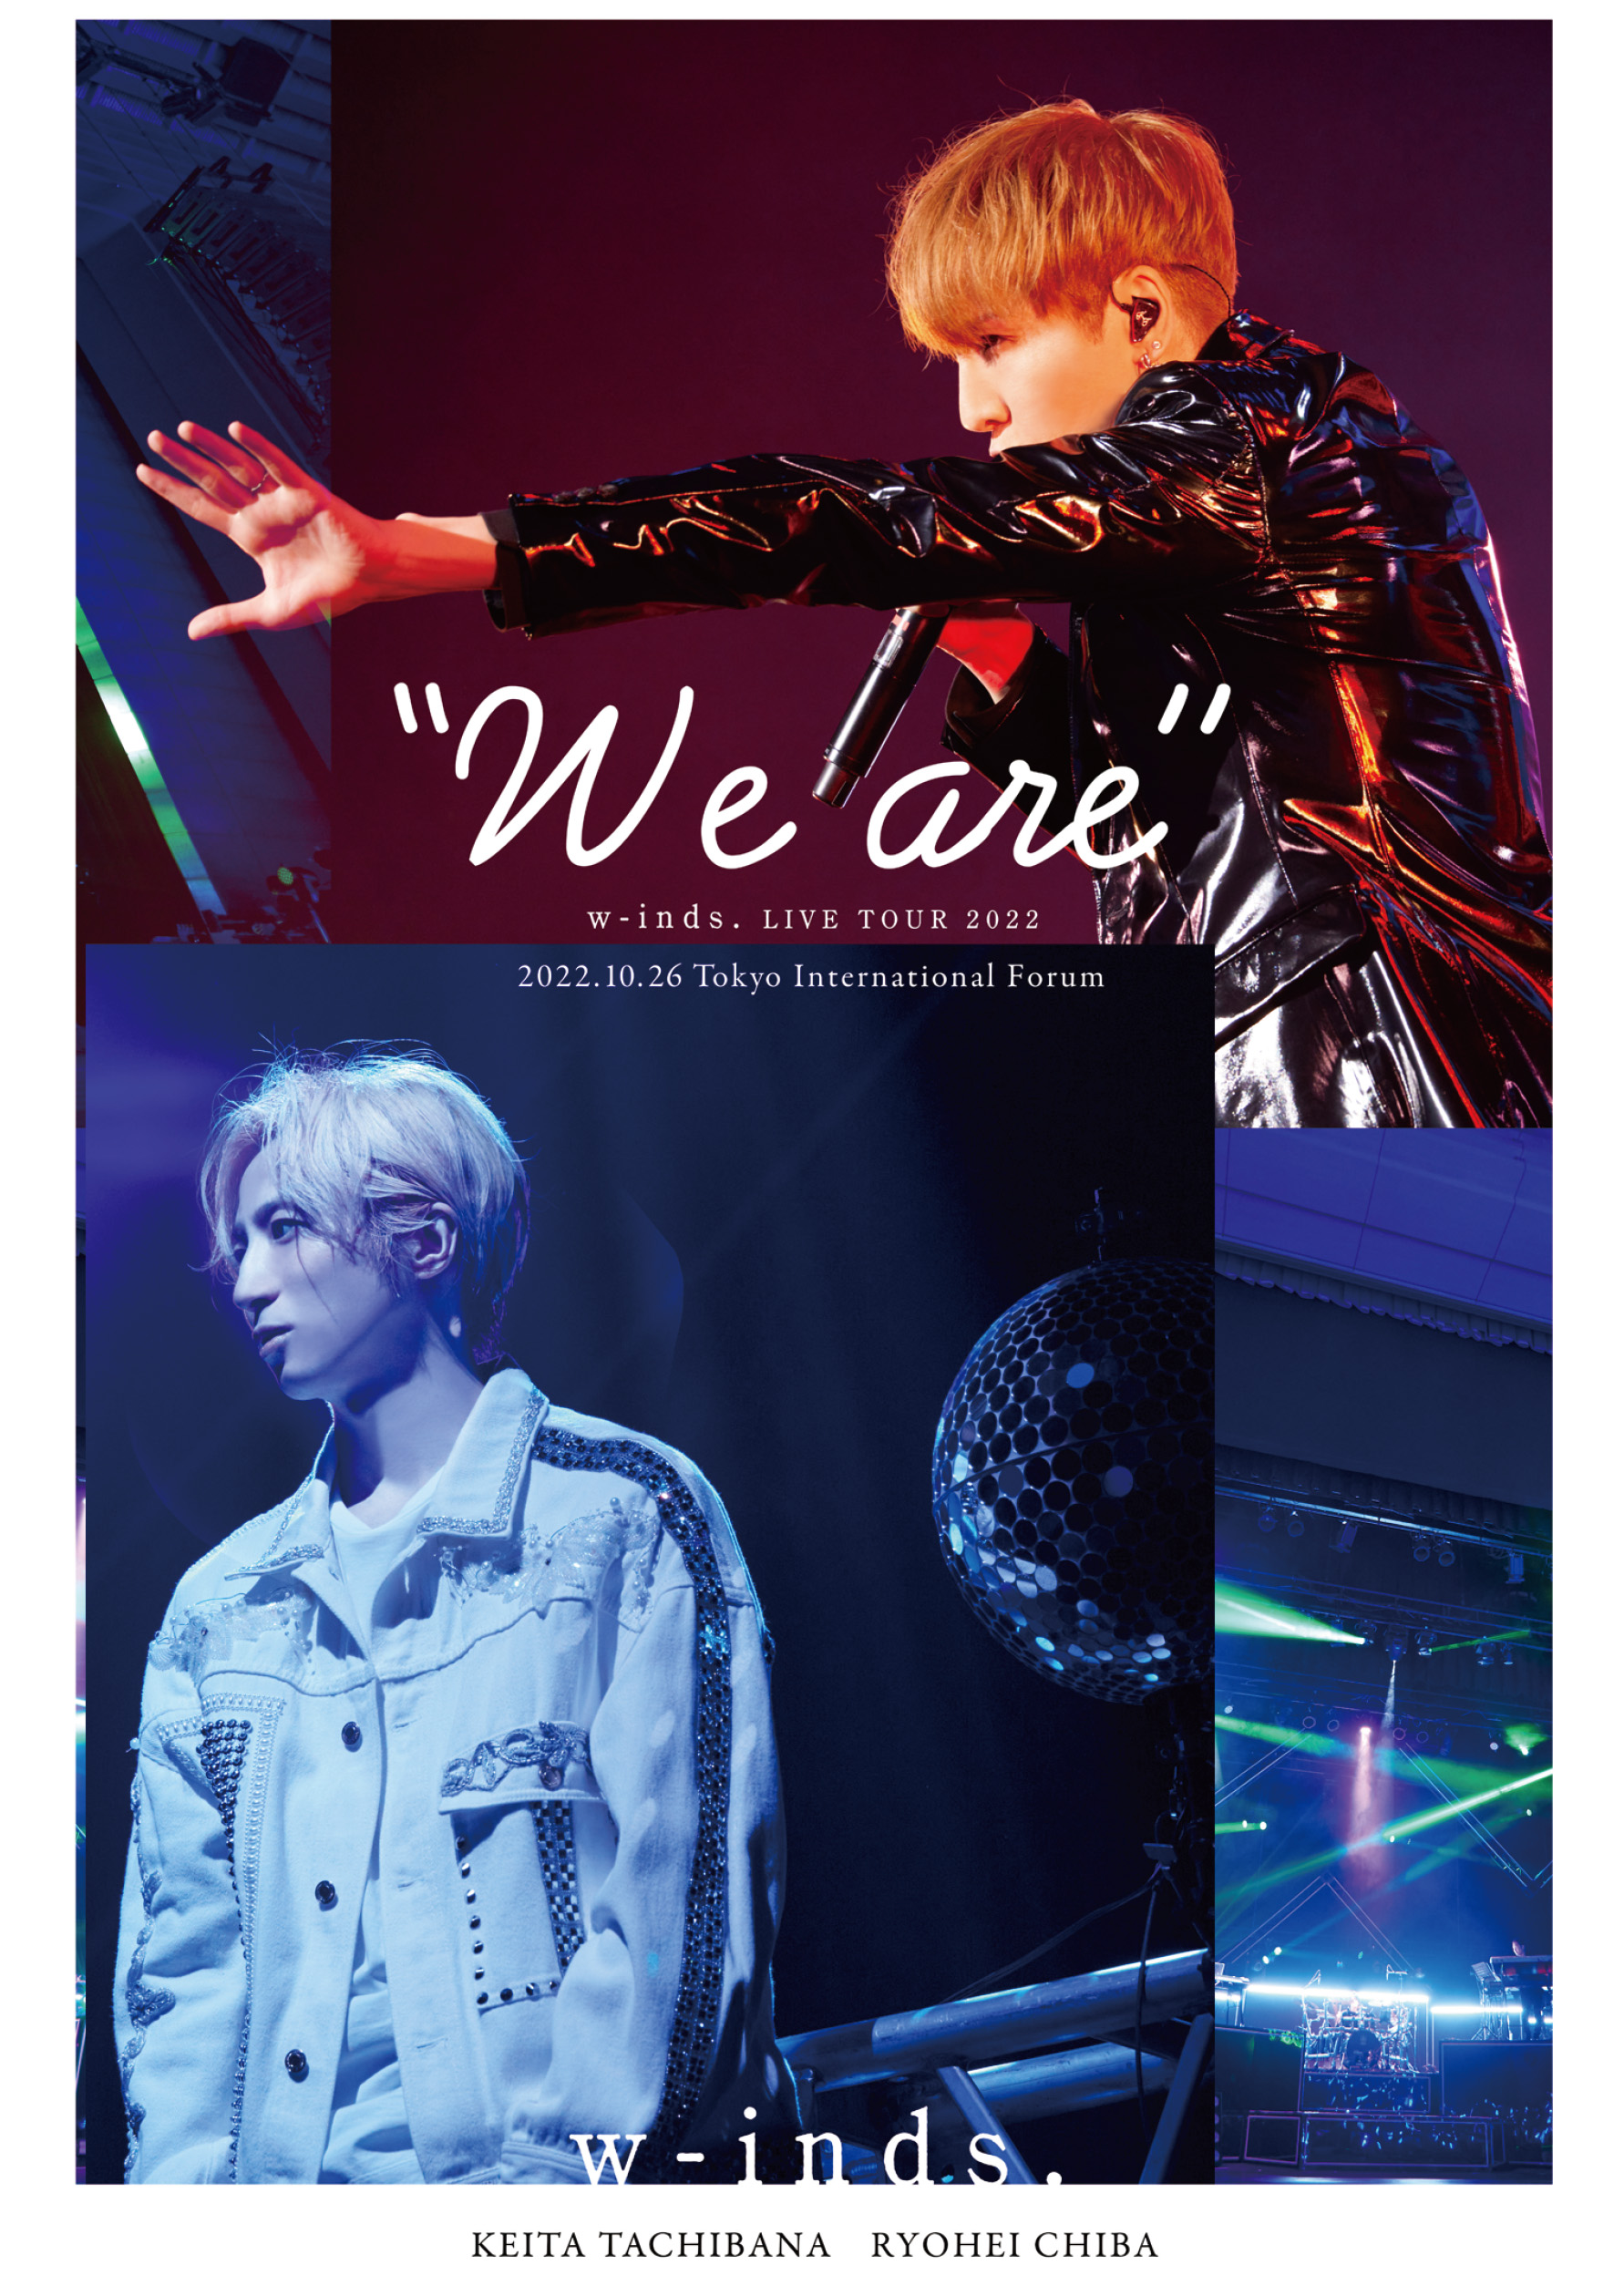 w-inds. LIVE TOUR 2022 "We are"